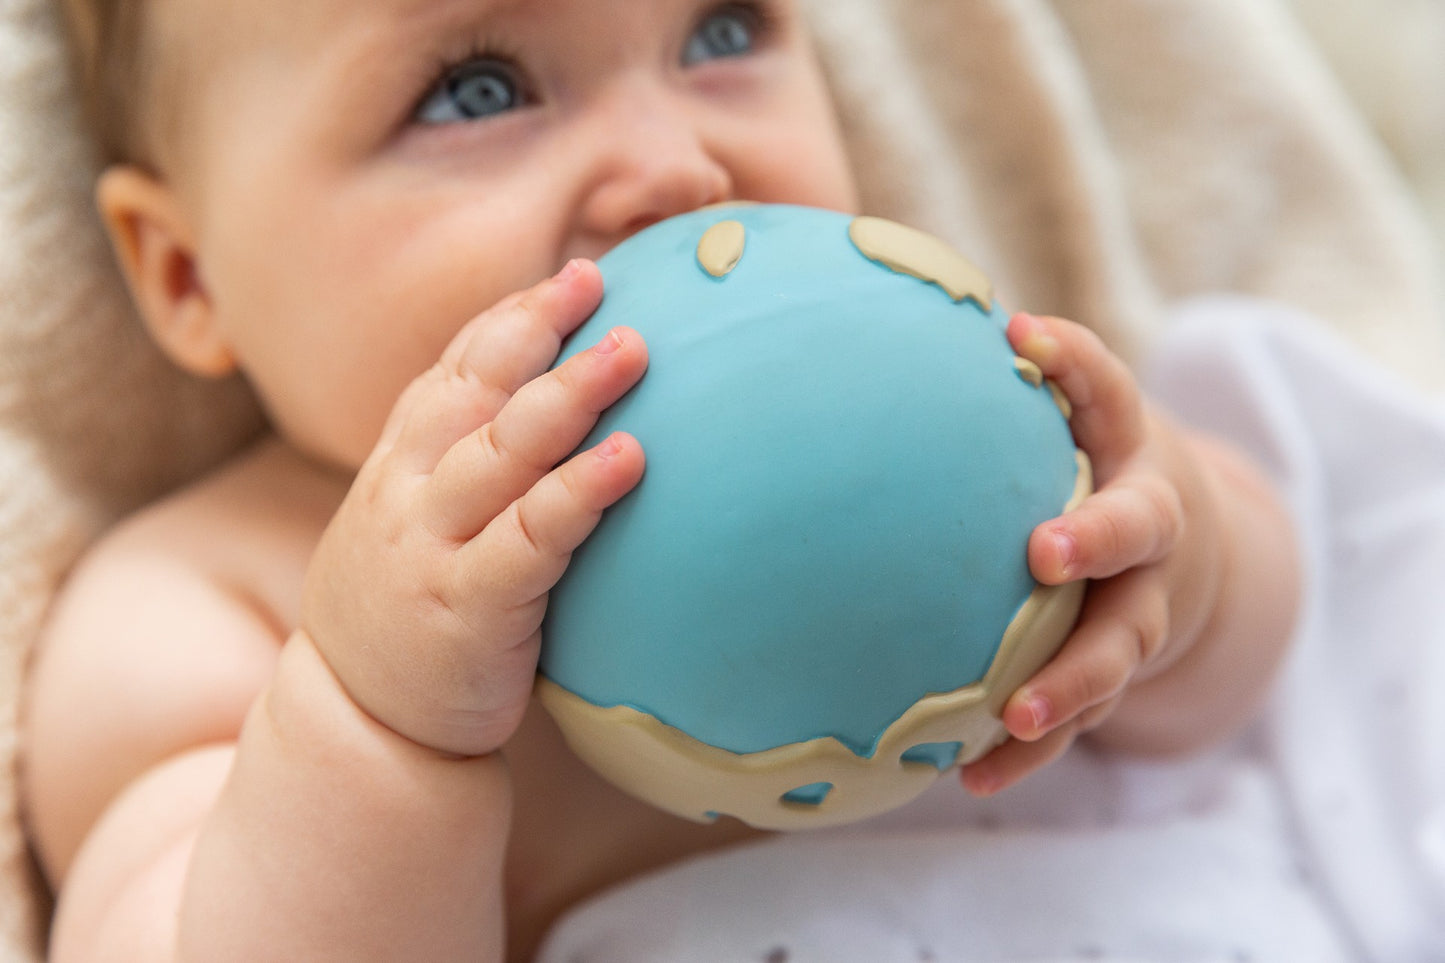 Earthy the World Ball 100% natural rubber teether and bath toy